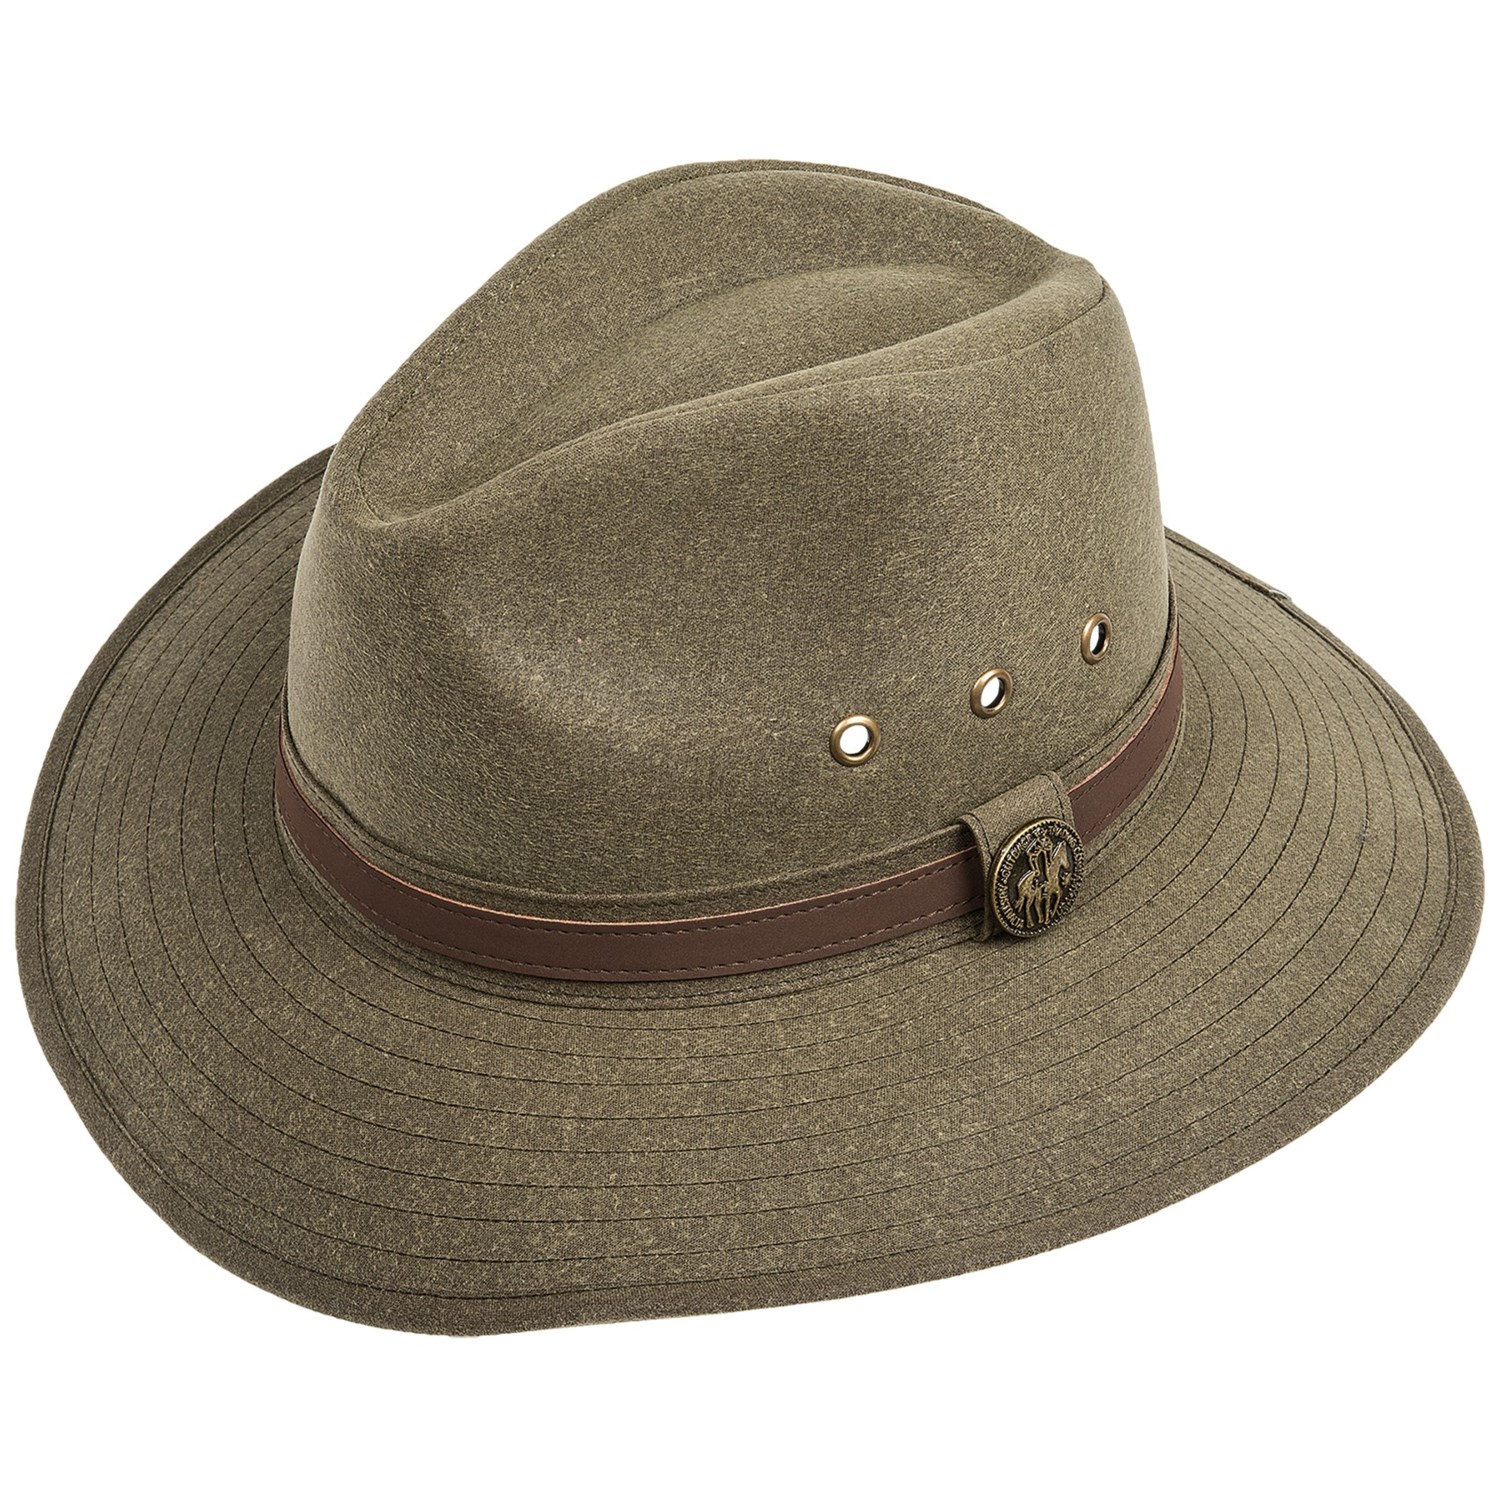 Outback Trading Rampart Hat - Oilskin Cotton (For Men and Women) - Save 38%